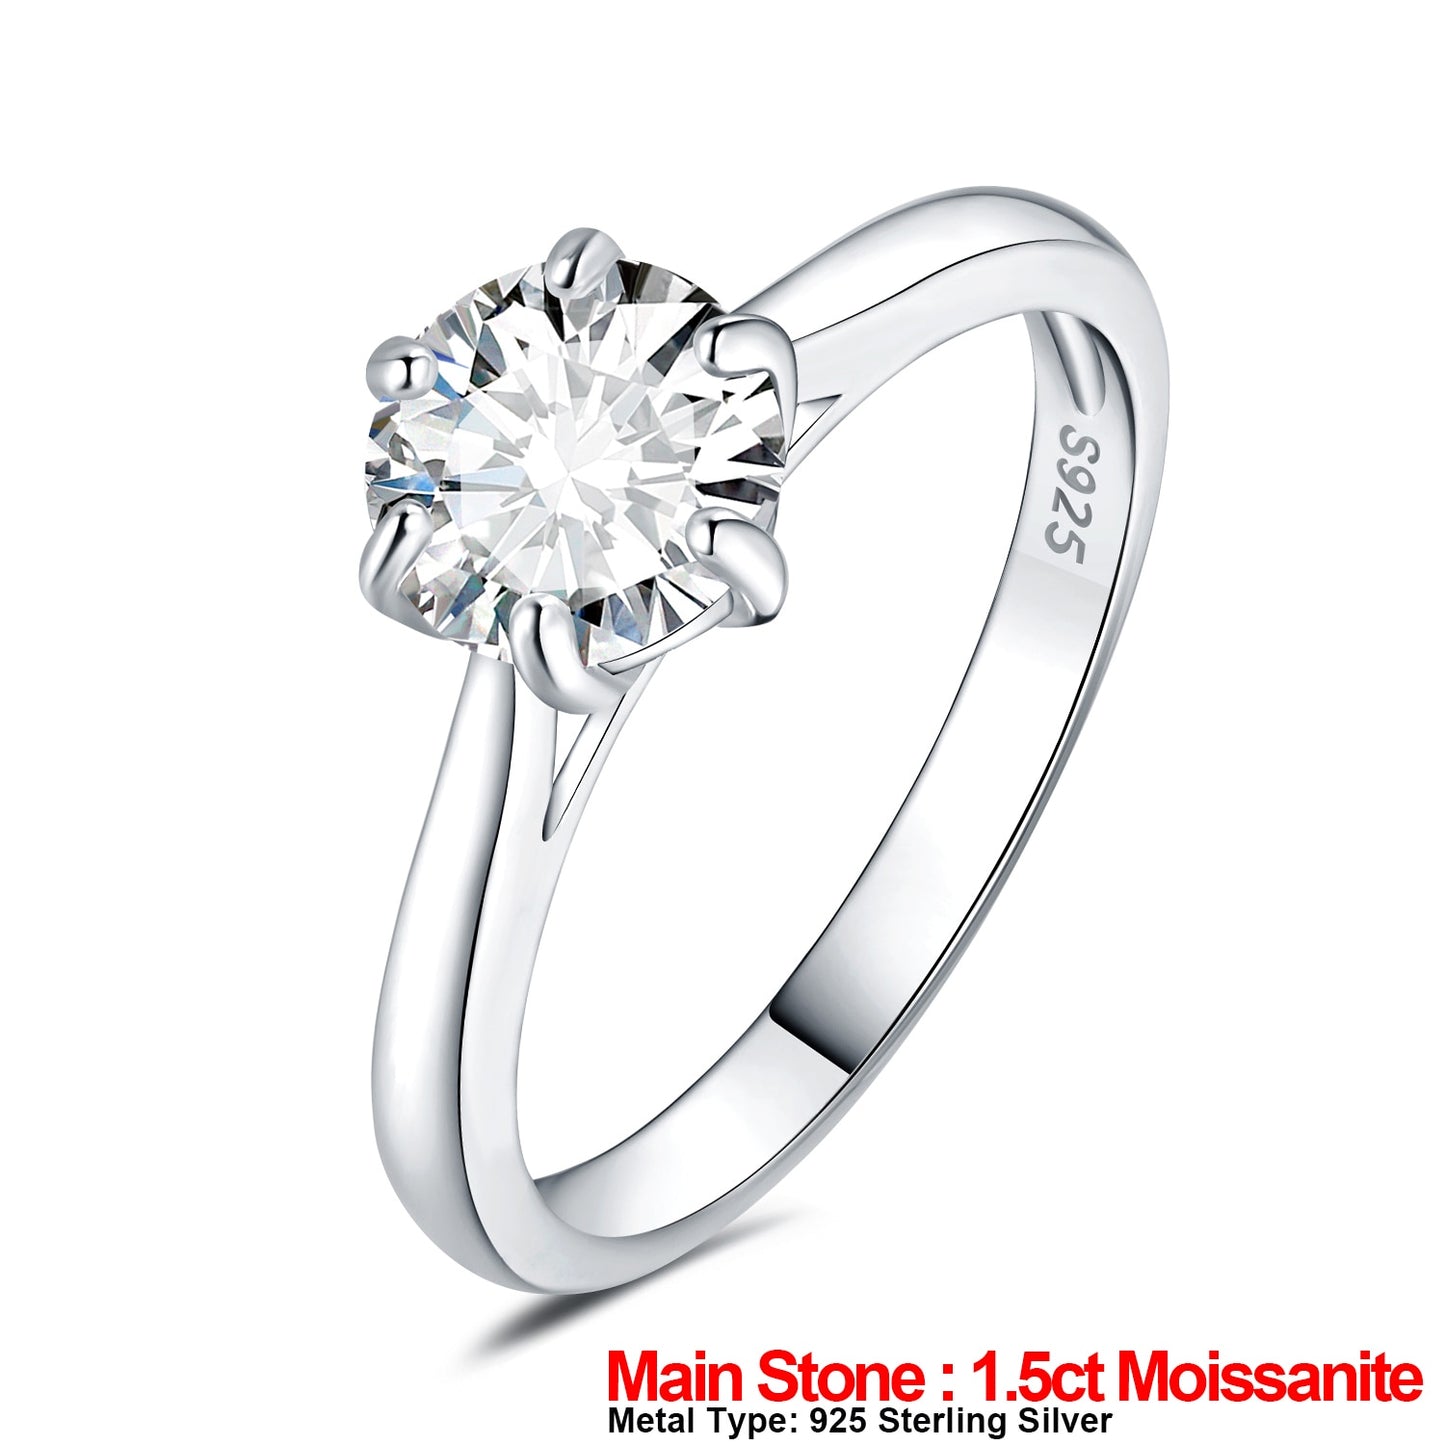 JewelryPalace Moissanite D Color 0.5ct 1ct 1.5ct 2ct Round Cut S925 Sterling Silver Solitaire Wedding Engagement Ring for Women 9 China 925 Sterling Silver 2|GRA Certificate